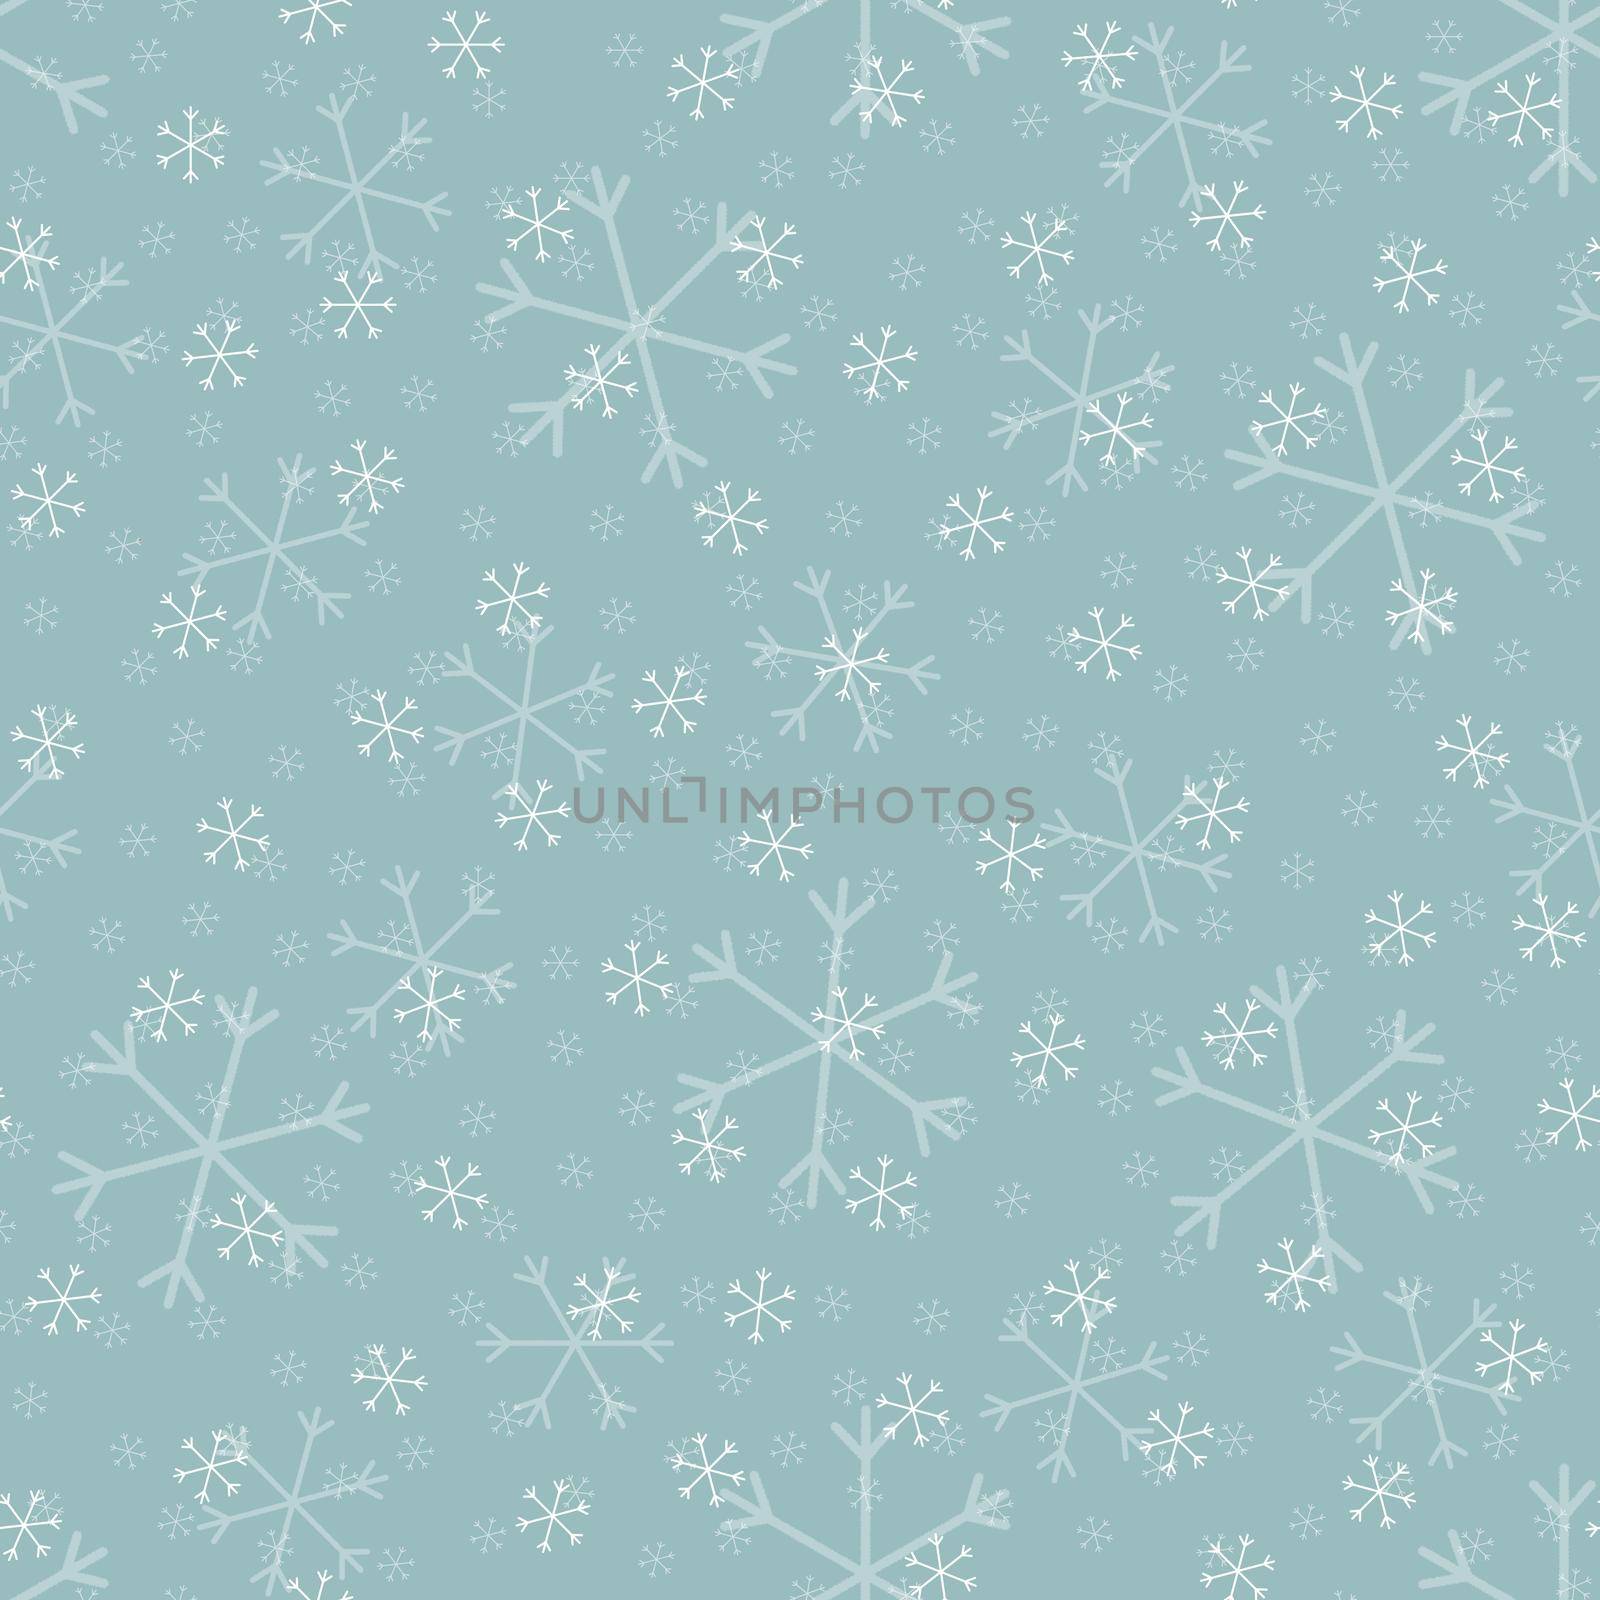 Seamless Christmas pattern doodle with hand random drawn snowflakes.Wrapping paper for presents, funny textile fabric print, design, decor, food wrap, backgrounds. new year.Raster copy.Sky gray, white